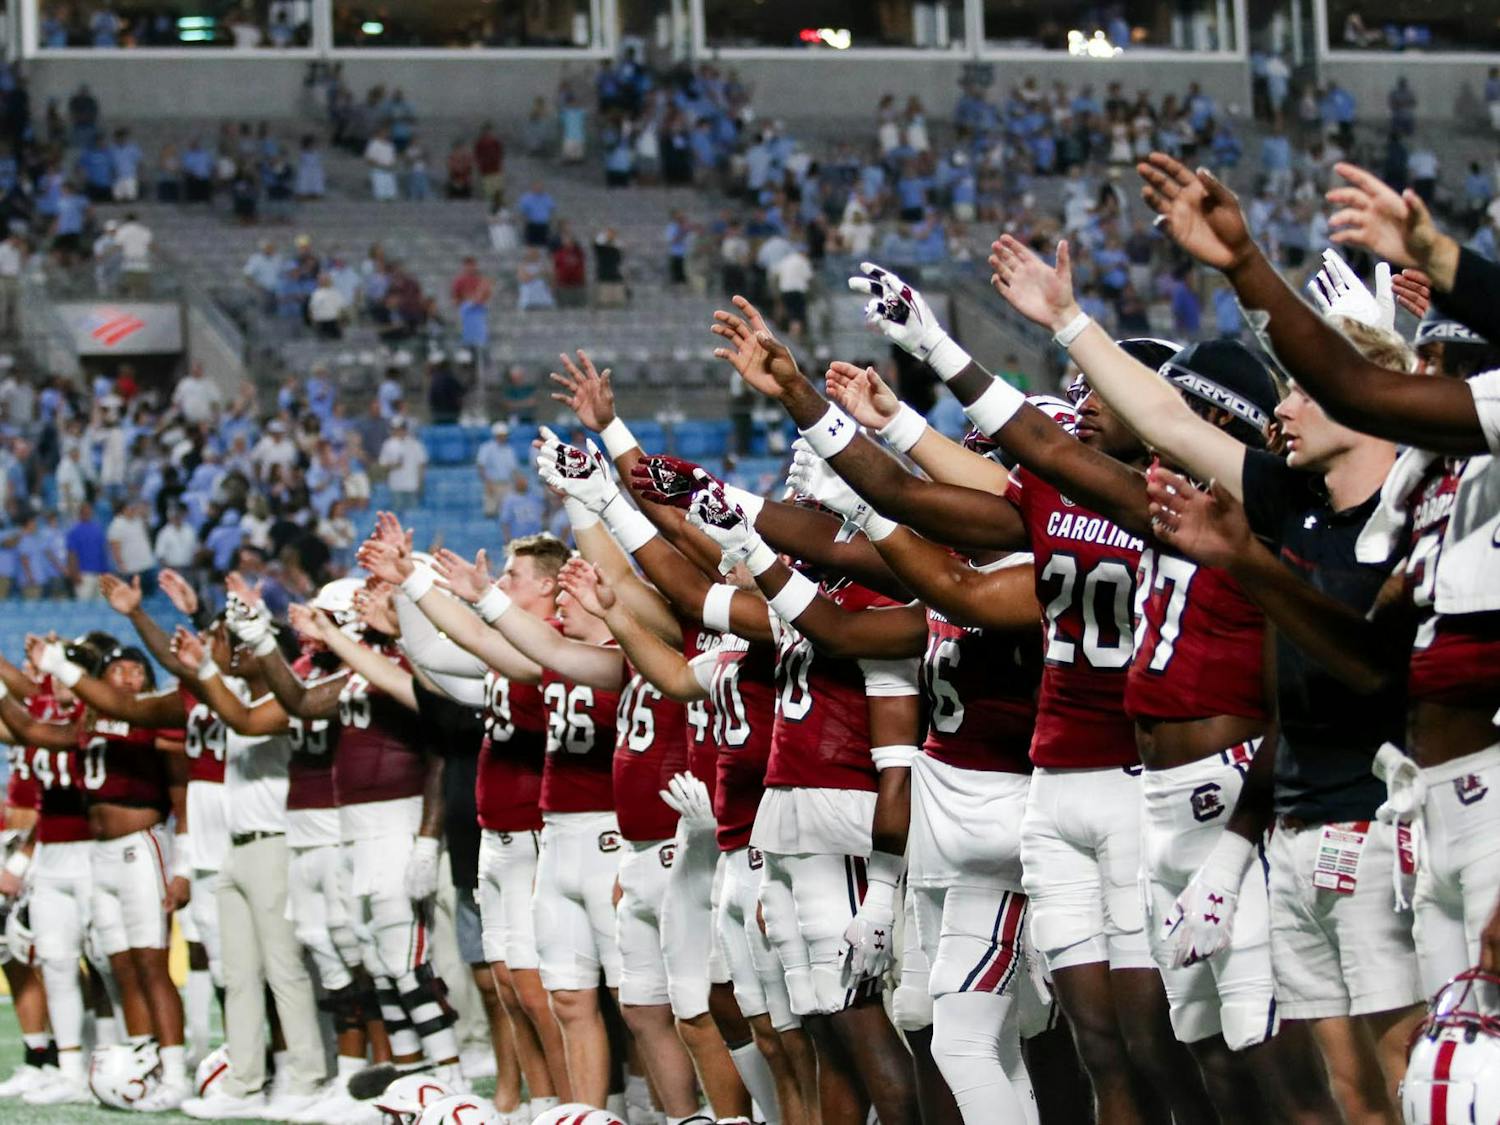 The University of South Carolina football team sings its school's alma mater at the Bank of America Stadium in Charlotte, North Carolina. The Gamecocks lost to the Tar Heels 31-17 on Sept. 2, 2023.